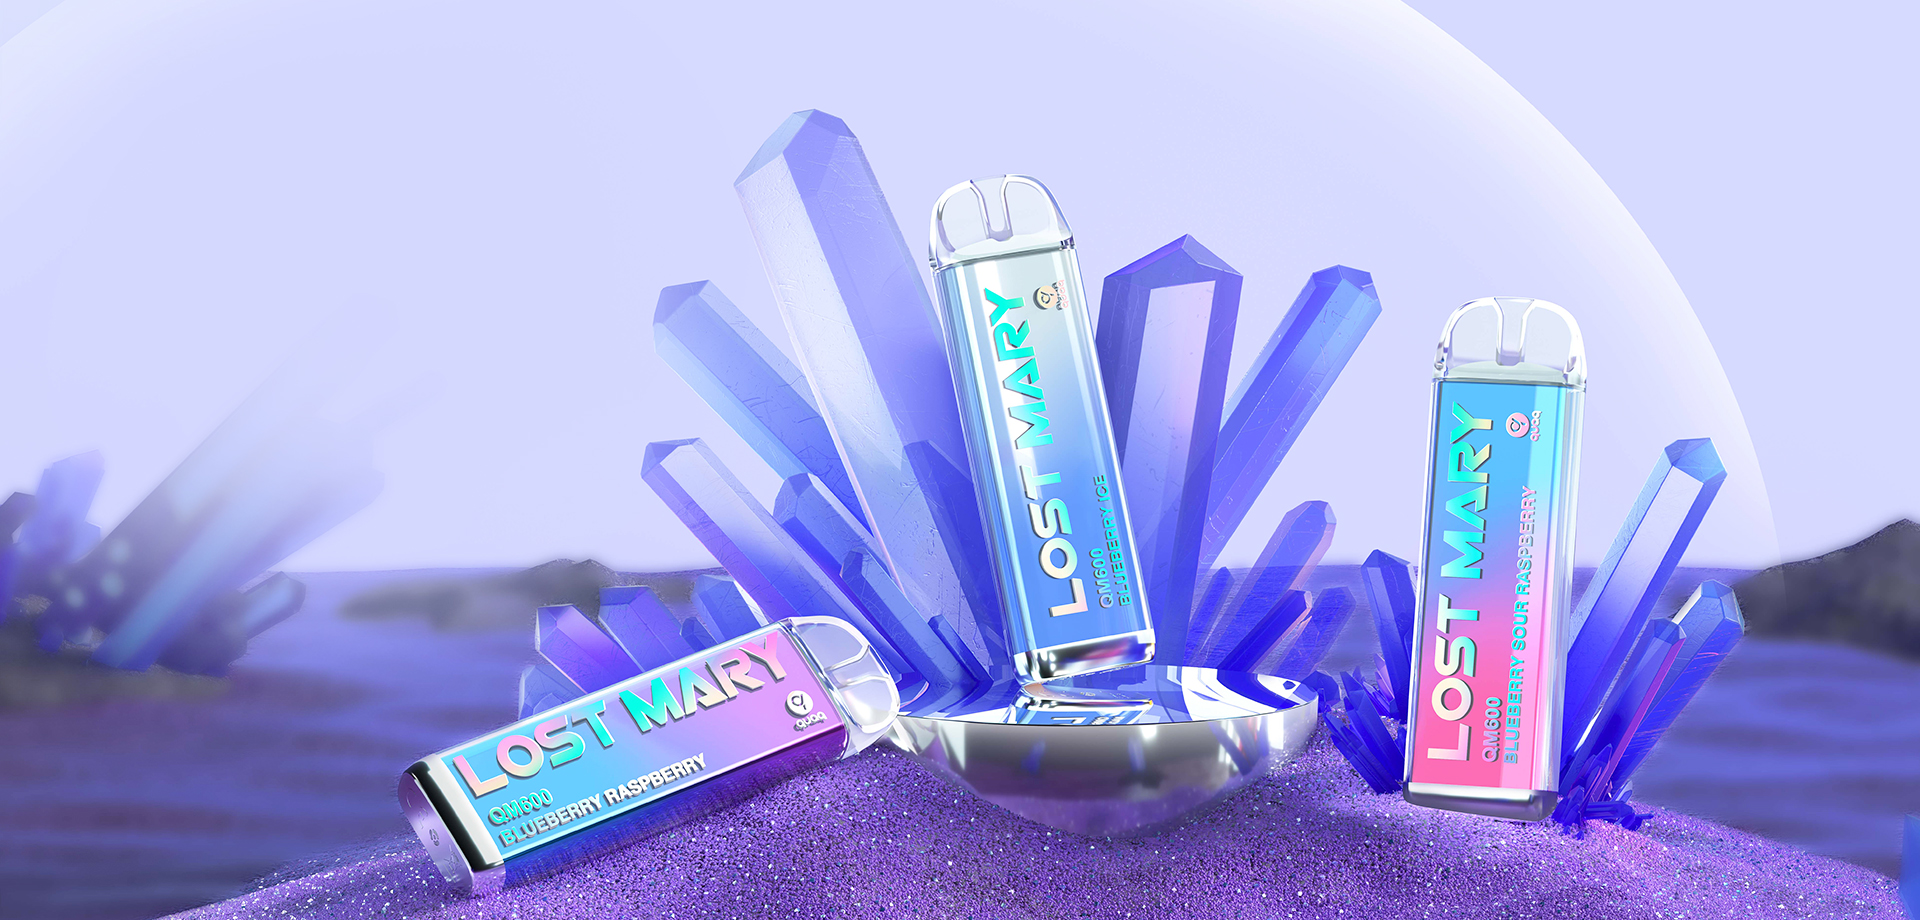 Cool and Refreshing: Exploring the Mint Flavored Vape Pen